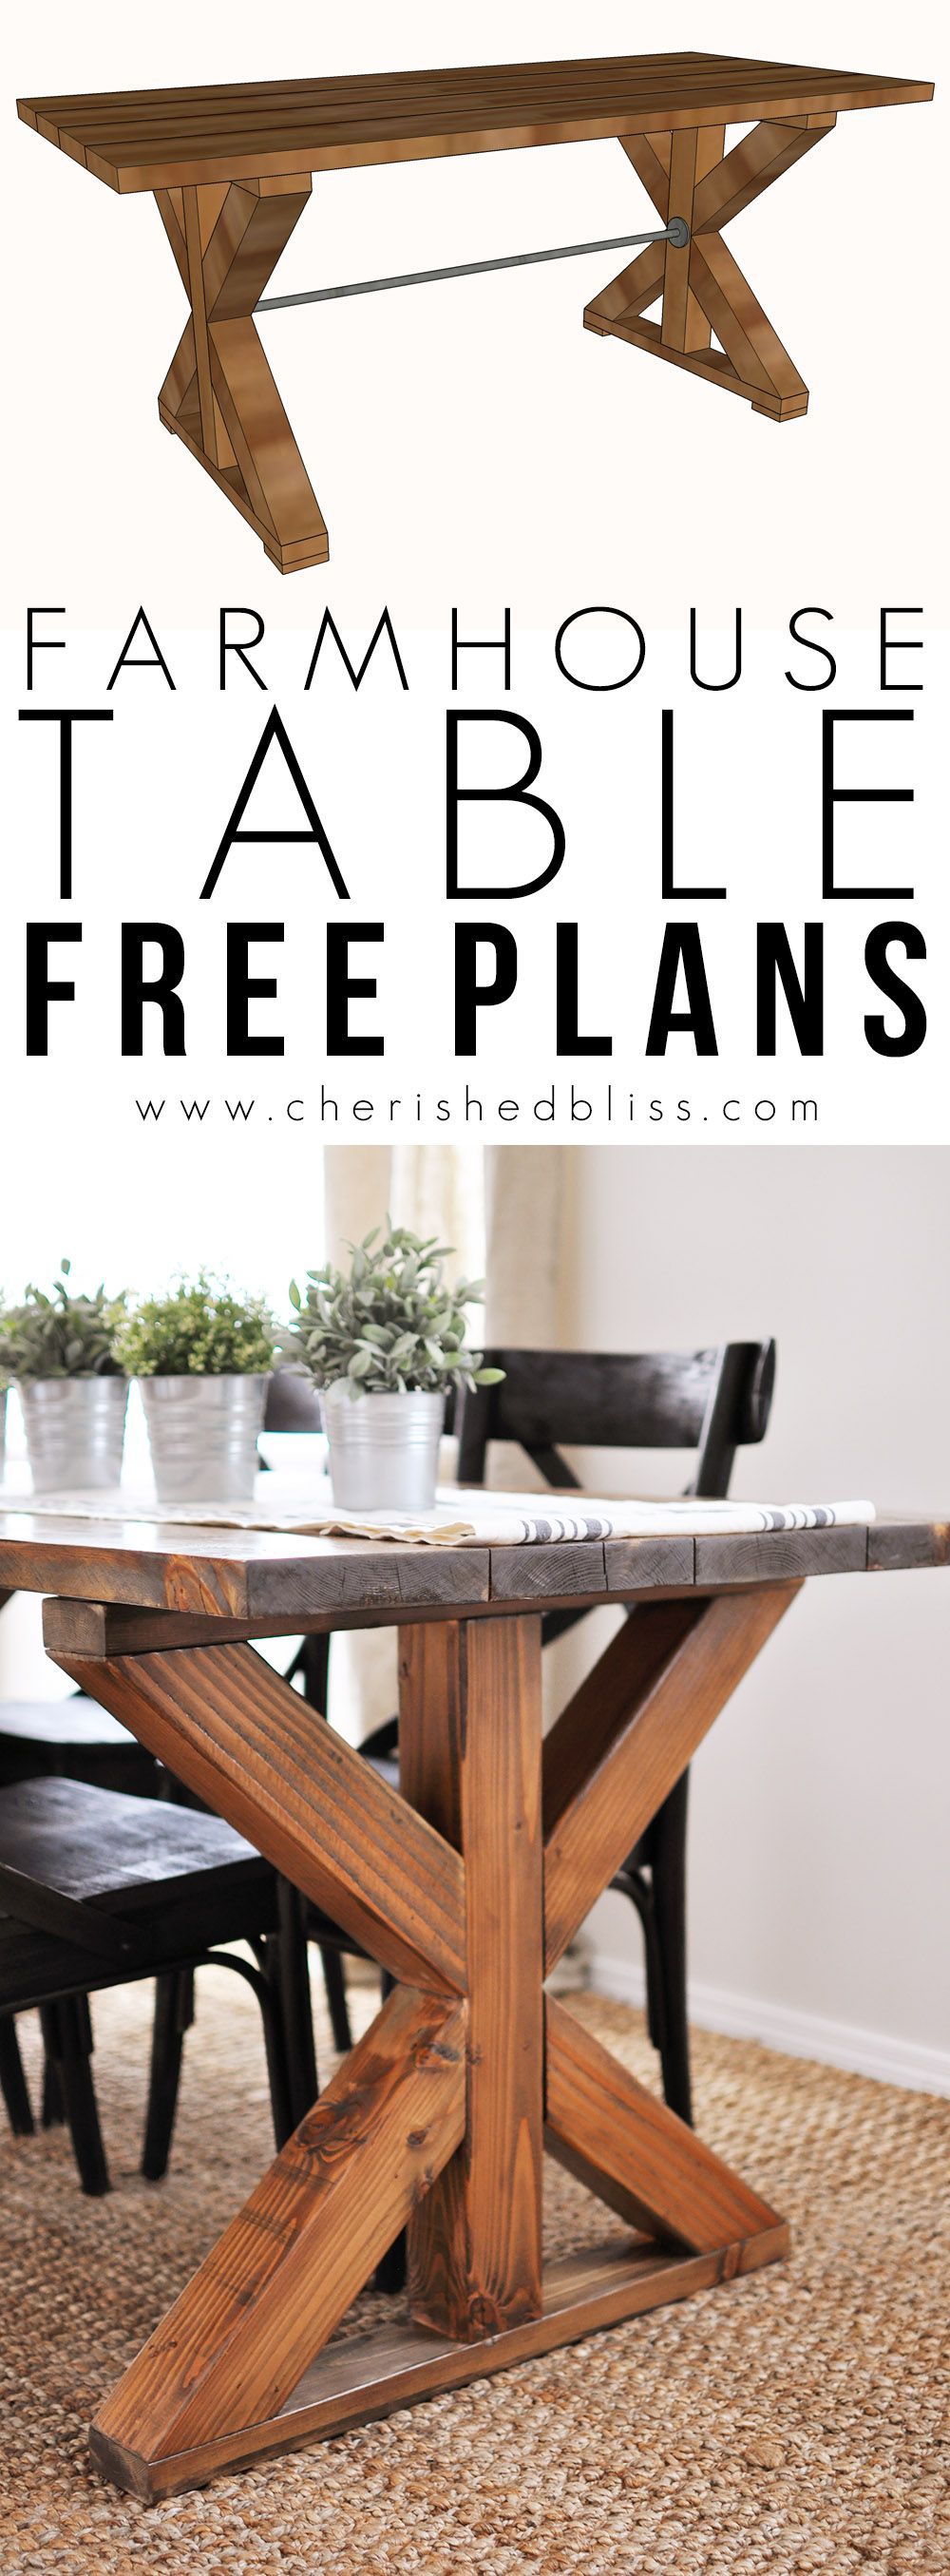 This easy to build Farmhouse Table is the perfect addition to any dining or breakfast room. With its industrial touches and